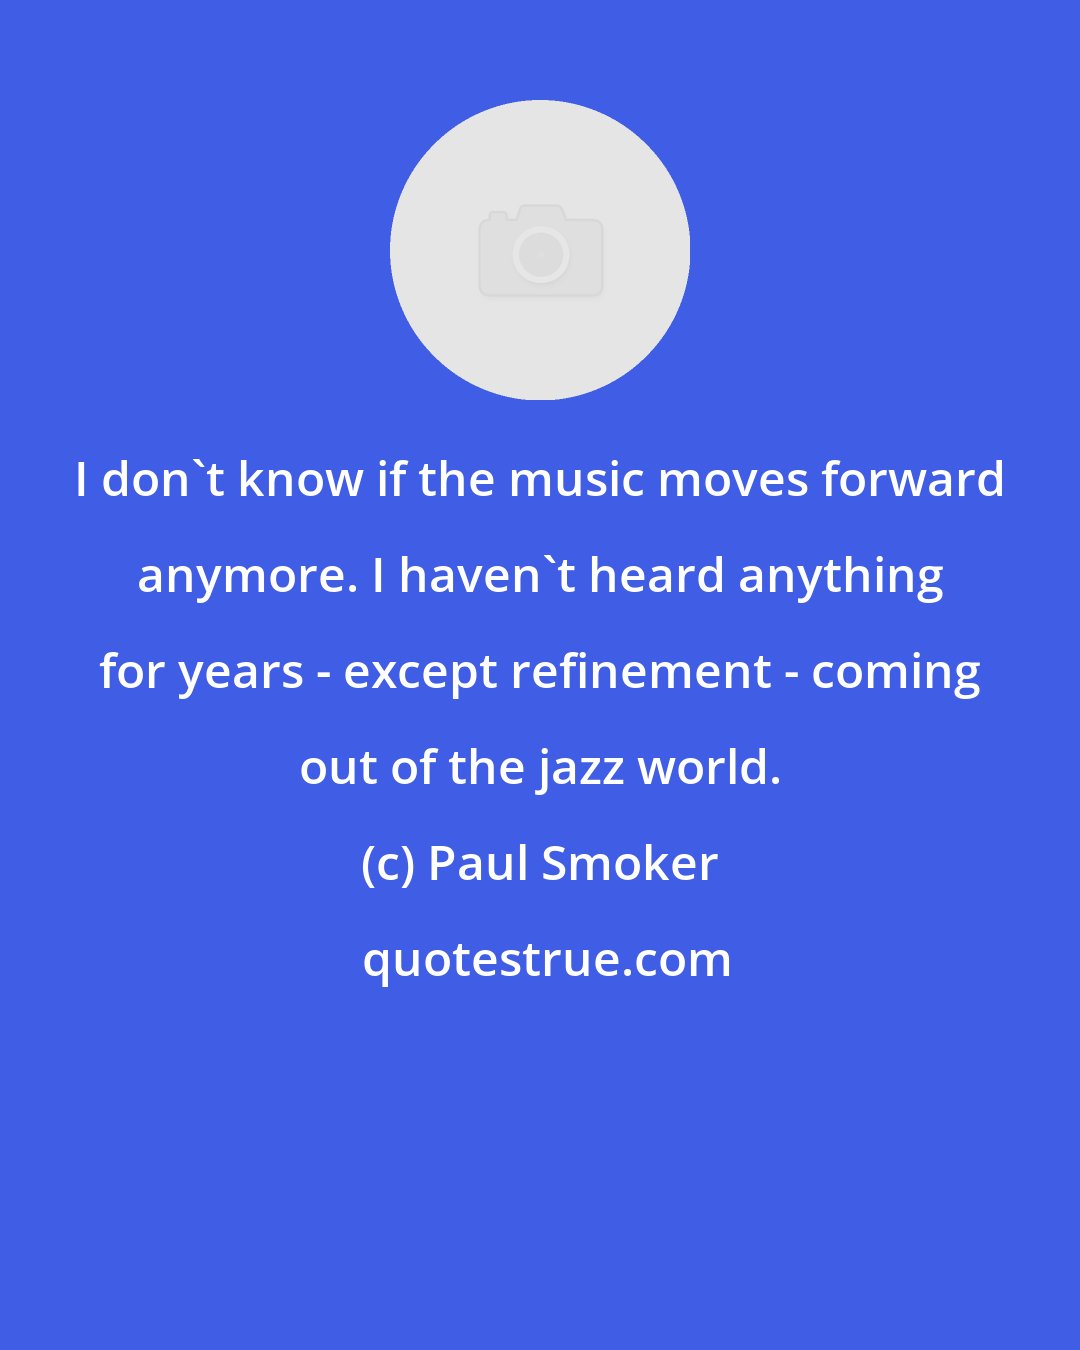 Paul Smoker: I don't know if the music moves forward anymore. I haven't heard anything for years - except refinement - coming out of the jazz world.